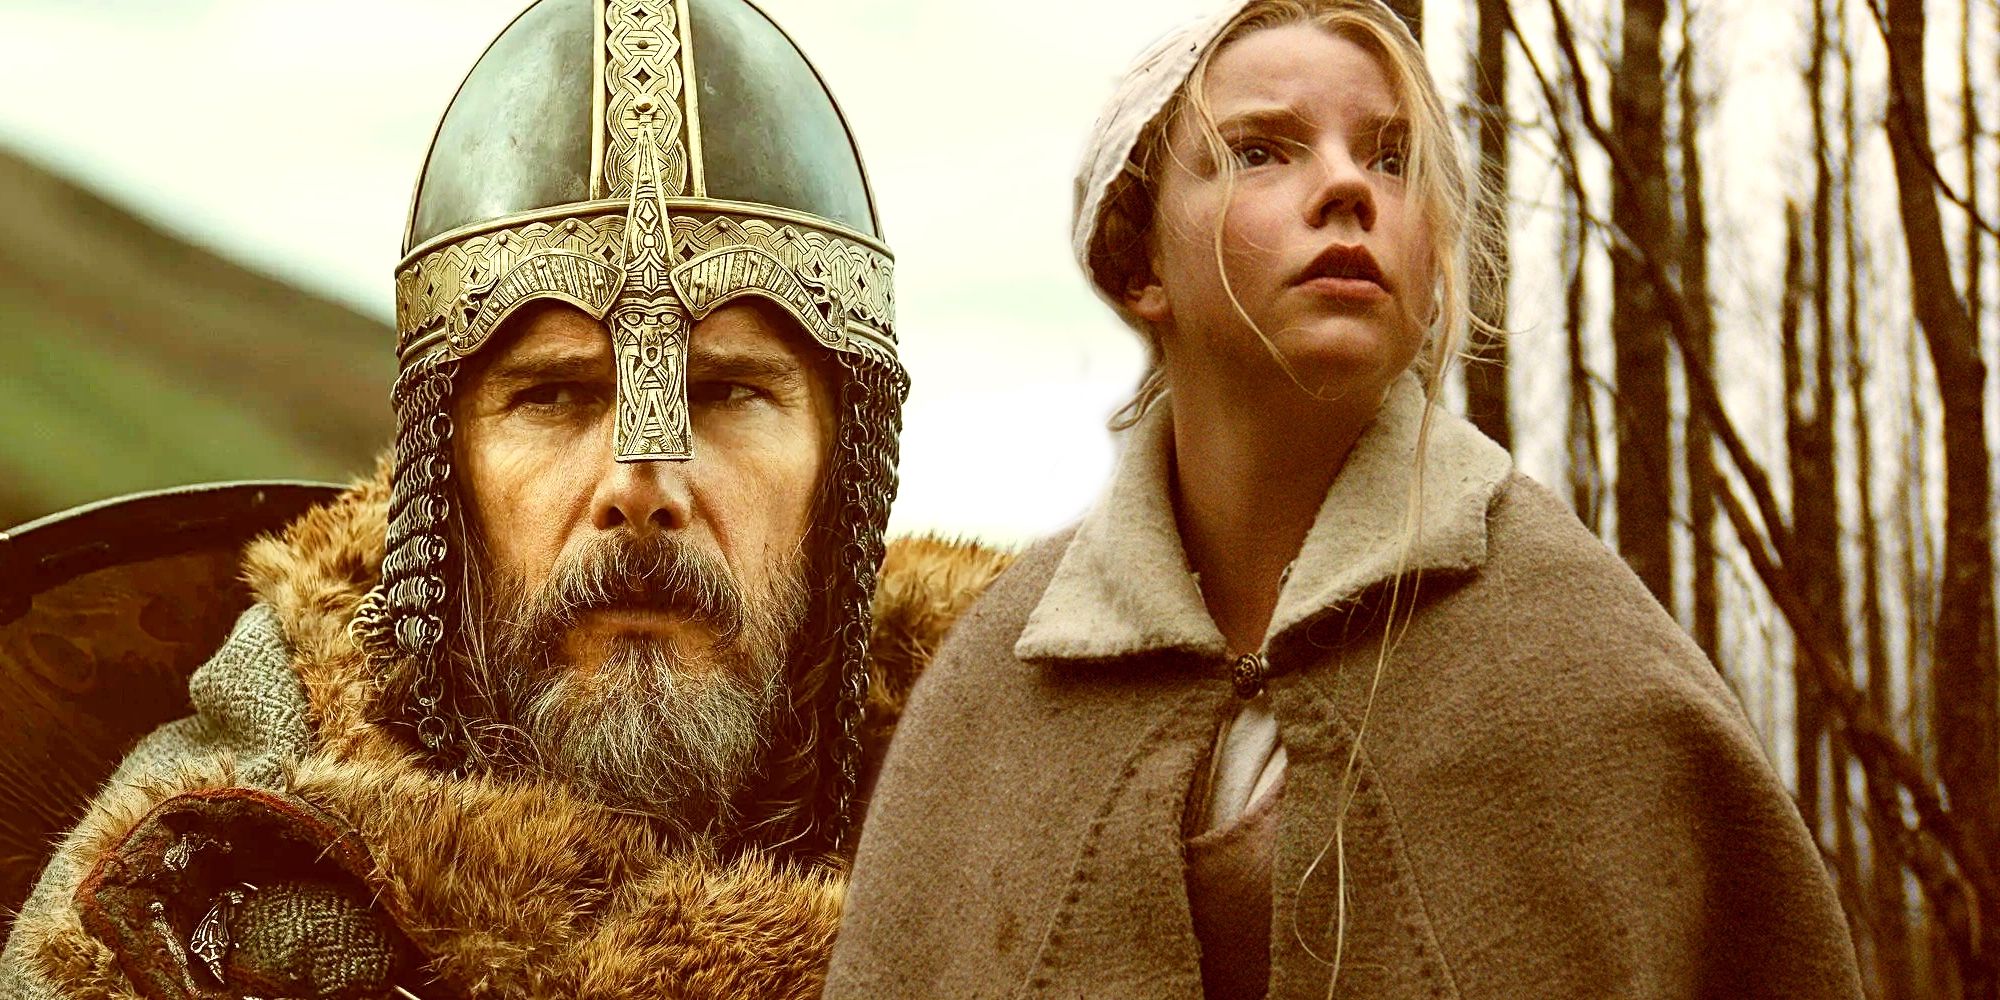 Every Robert Eggers Movie Ranked Worst To Best (Including The Northman)